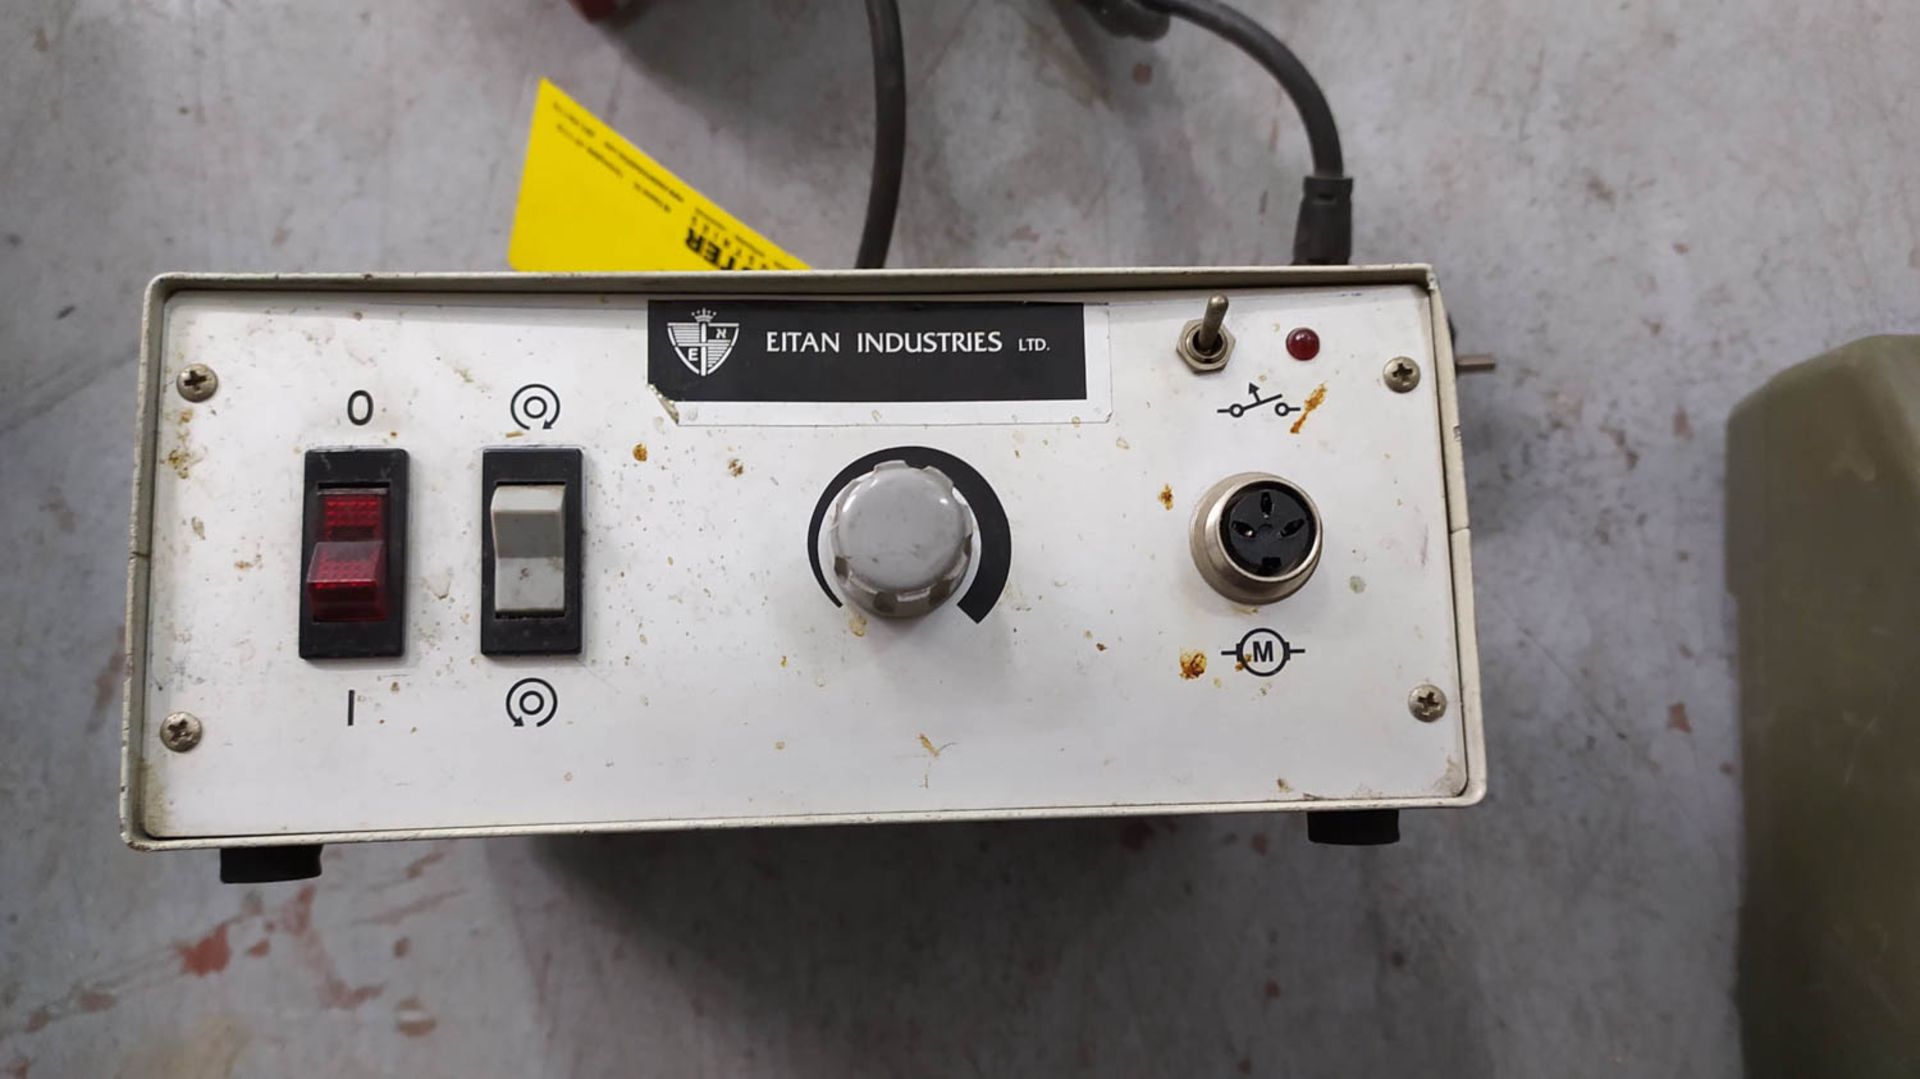 EITAN INDUSTRIES MDL. 5352 MICROMOTOR; 220-230V; 2 AMP, S/N: 12456 [A#368][LOCATED IN Holon]